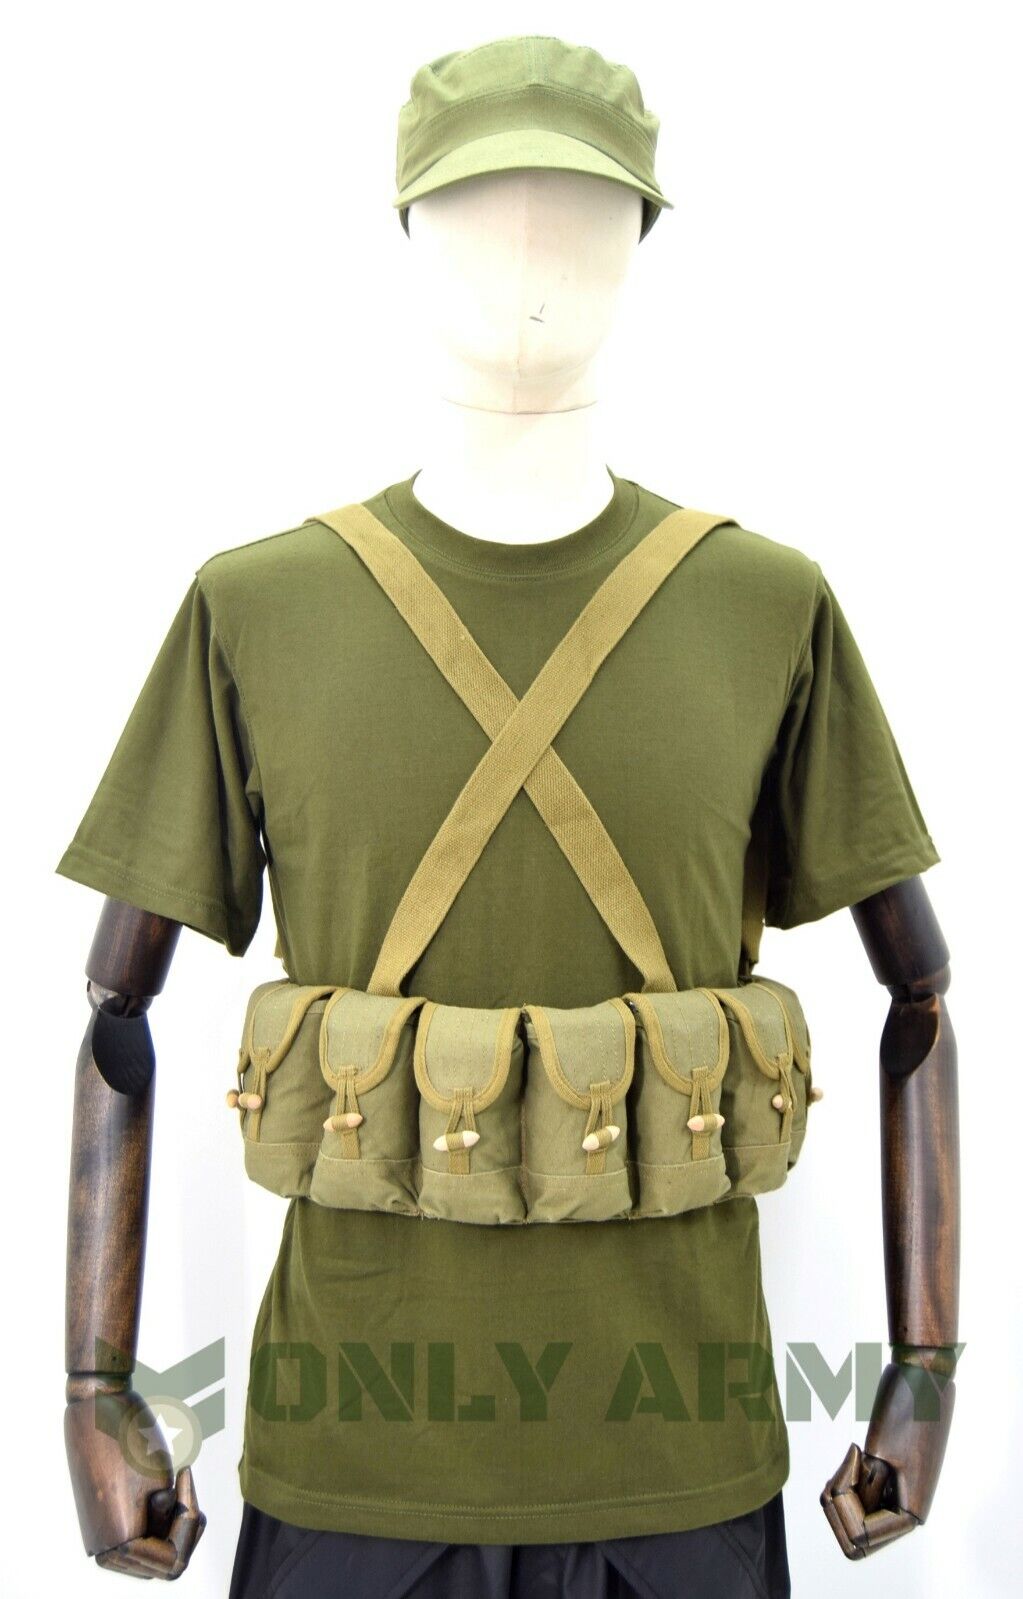 Korean Military Chest Rig / Bandolier 10 Pouch 7.62MM Ammo Airsoft Mag Carrier